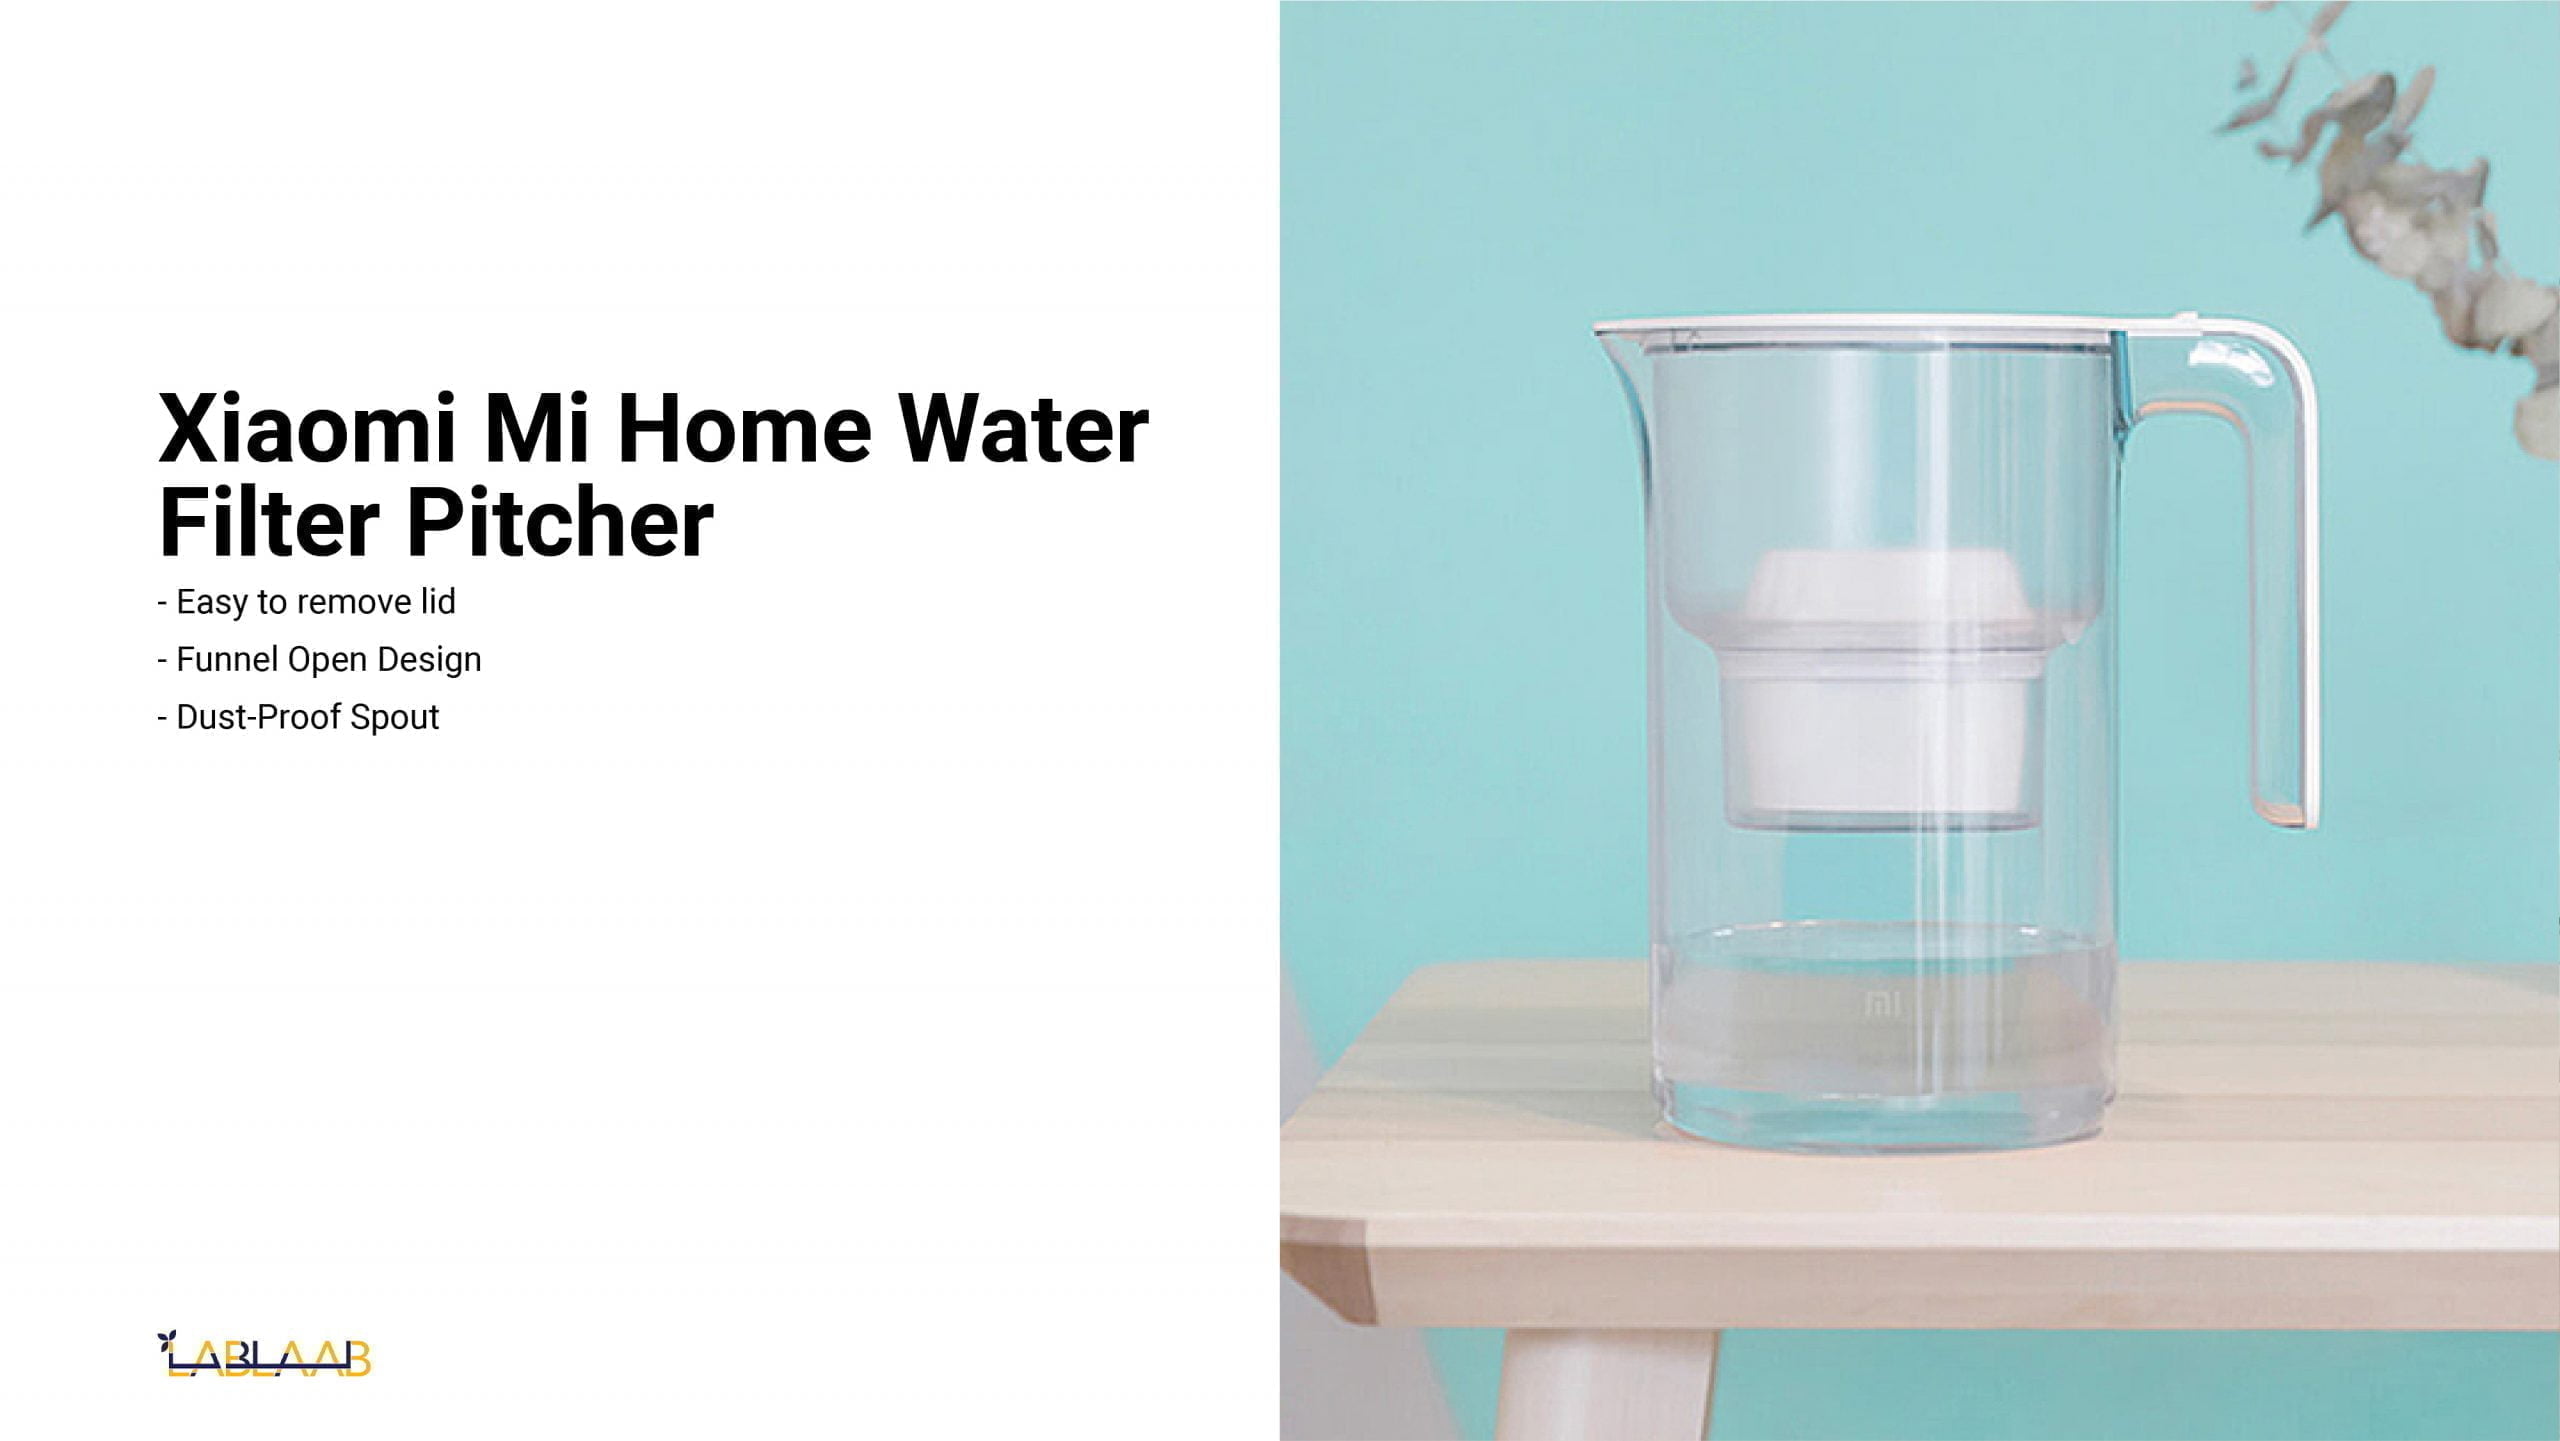 Xiaomi Mi Home Water Filter Pitcher 01 Scaled Xiaomi Xiaomi Mi Home Water Filter Pitcher Easy To Remove The Lid, Funnel Open Design, Dust-Proof Spout &Nbsp; Xiaomi Xiaomi Mi Home Water Filter Pitcher